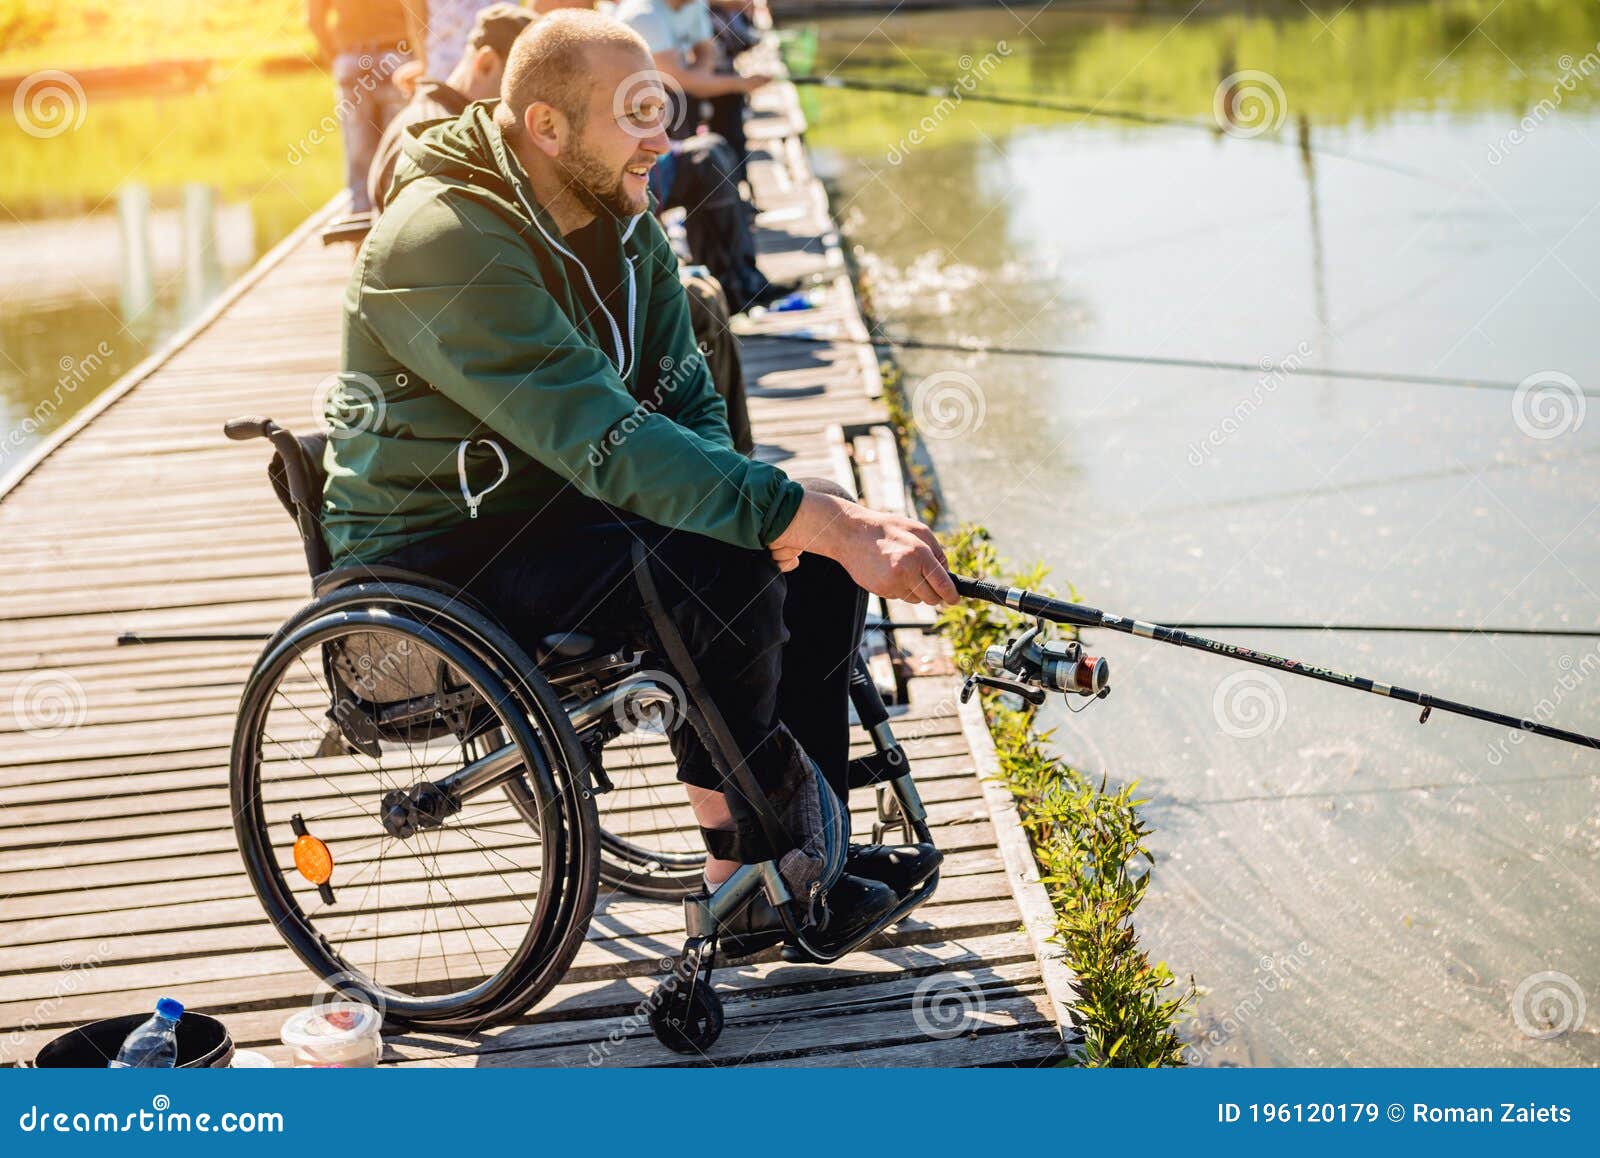 championship in sports fishing among people with disabilities.